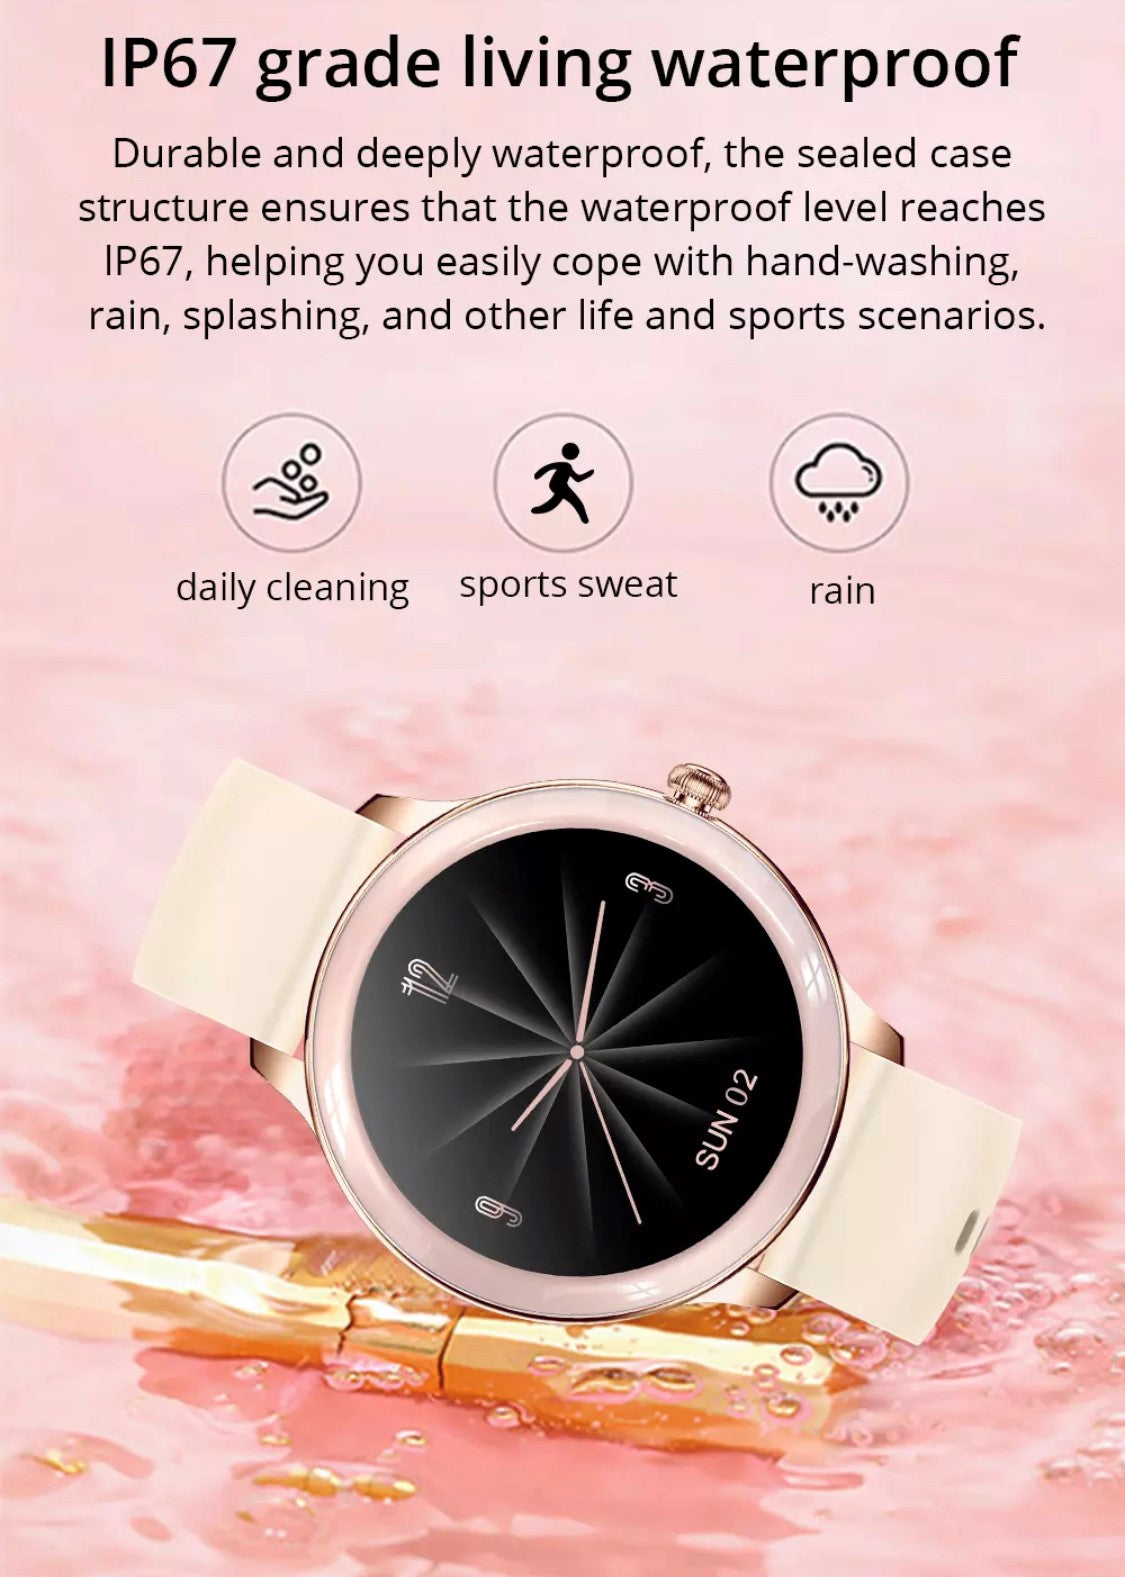 Colmi V33 Gold Smart Watch South Africa